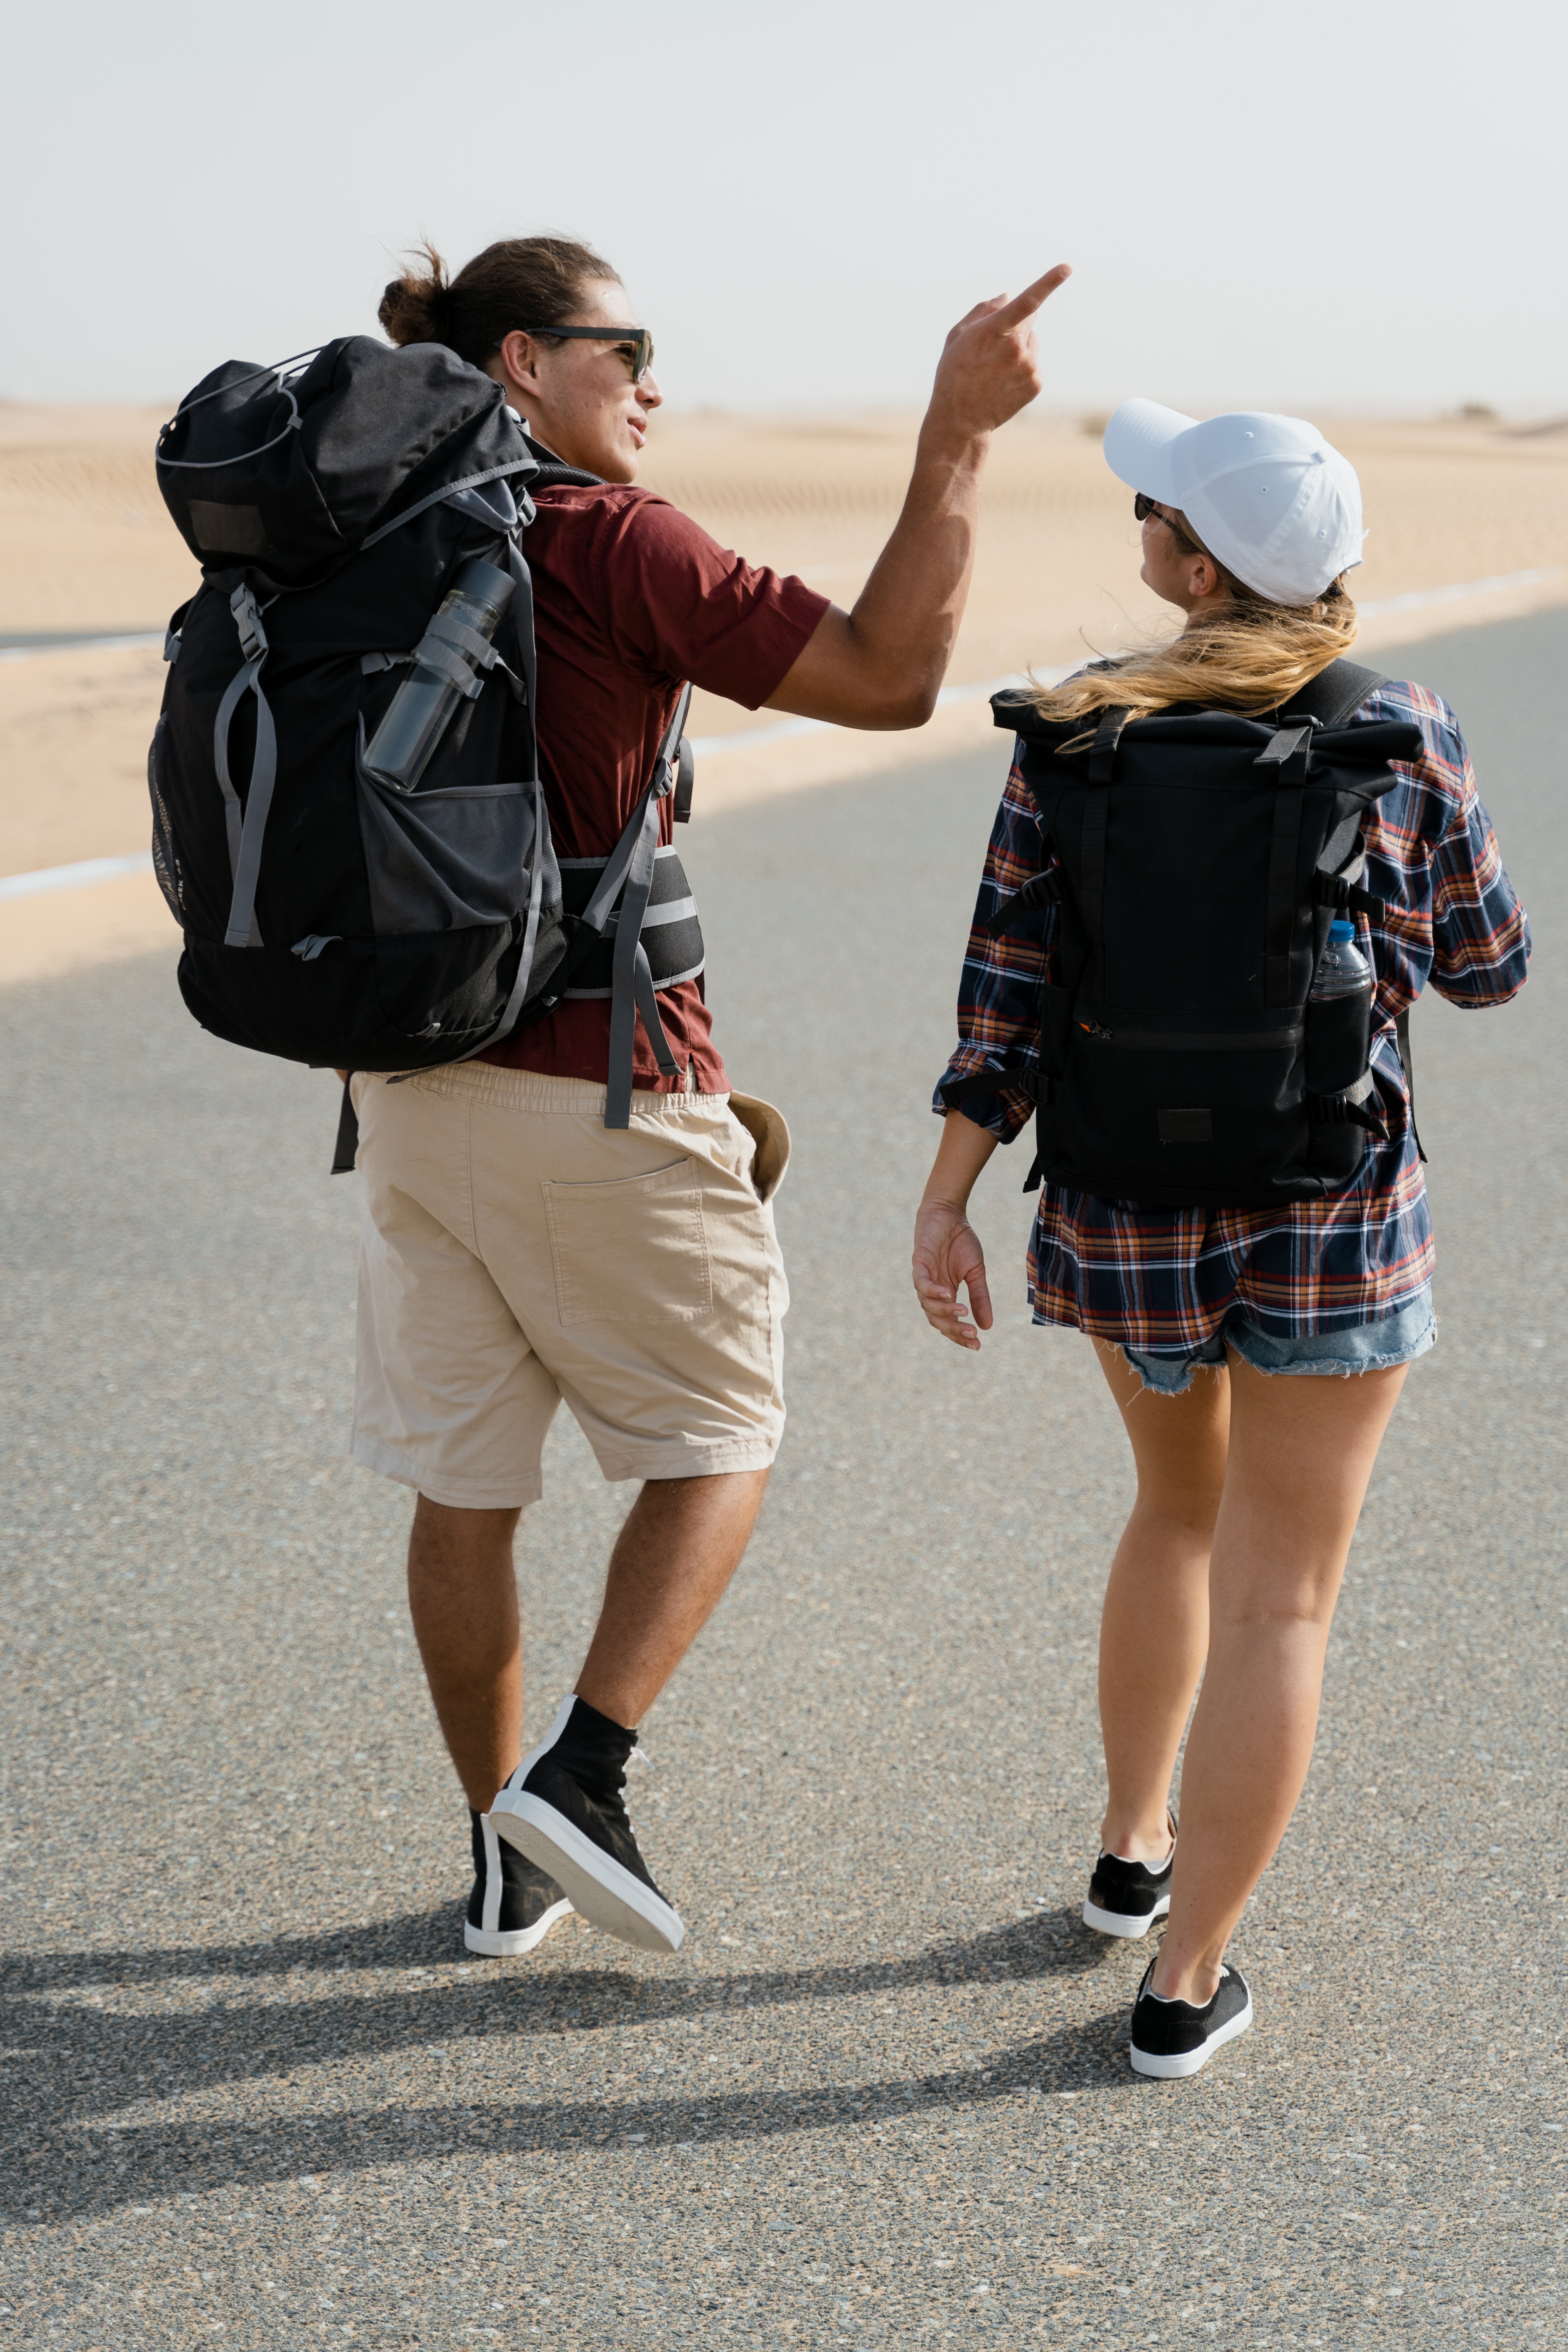 A couple backpacking together. | Source: Pexels